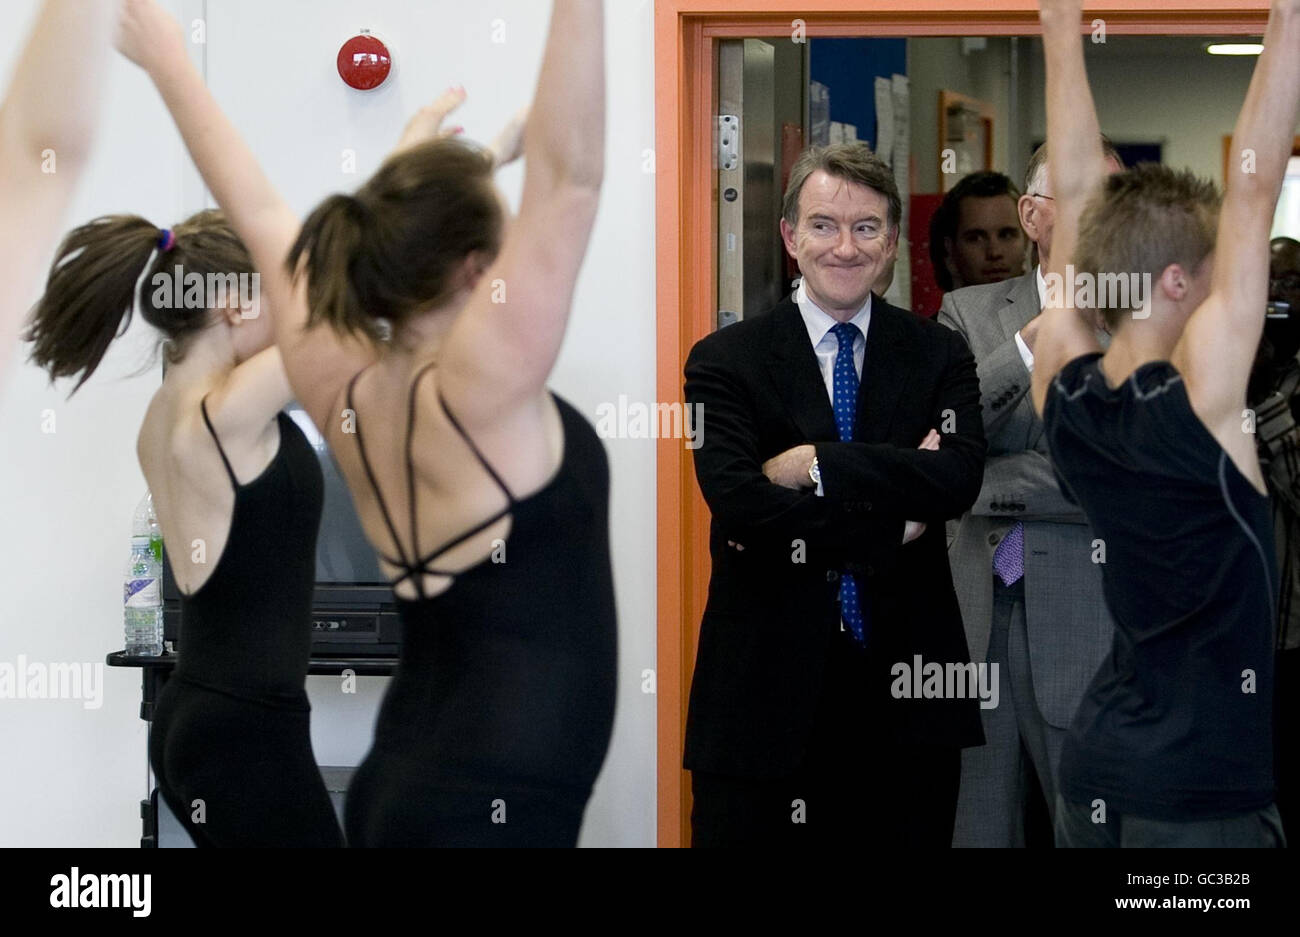 Business Secretary Lord Mandelson watches dancers during a visit to the the British School of Performing Arts in Croydon. Stock Photo